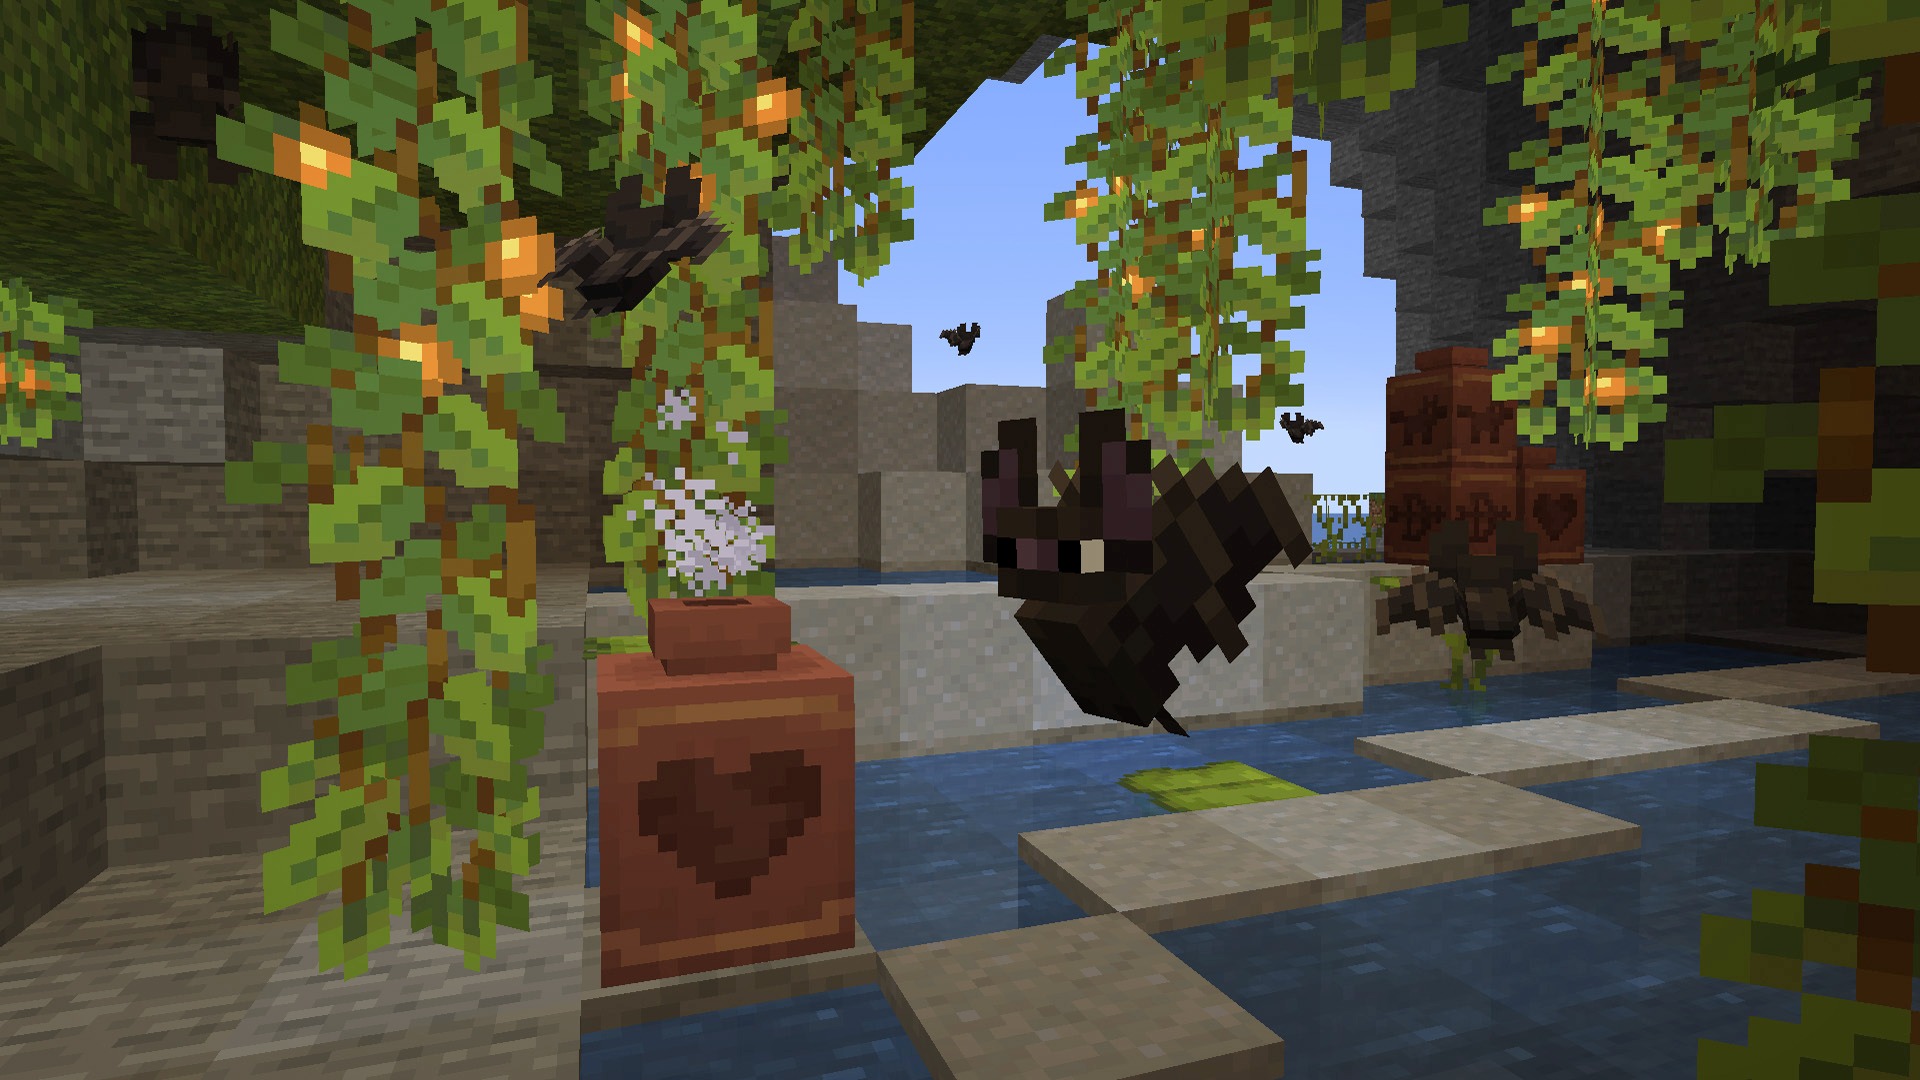 Latest Minecraft updates give decorative pots and purpose and make bats look more Minecraft-y (and cute)